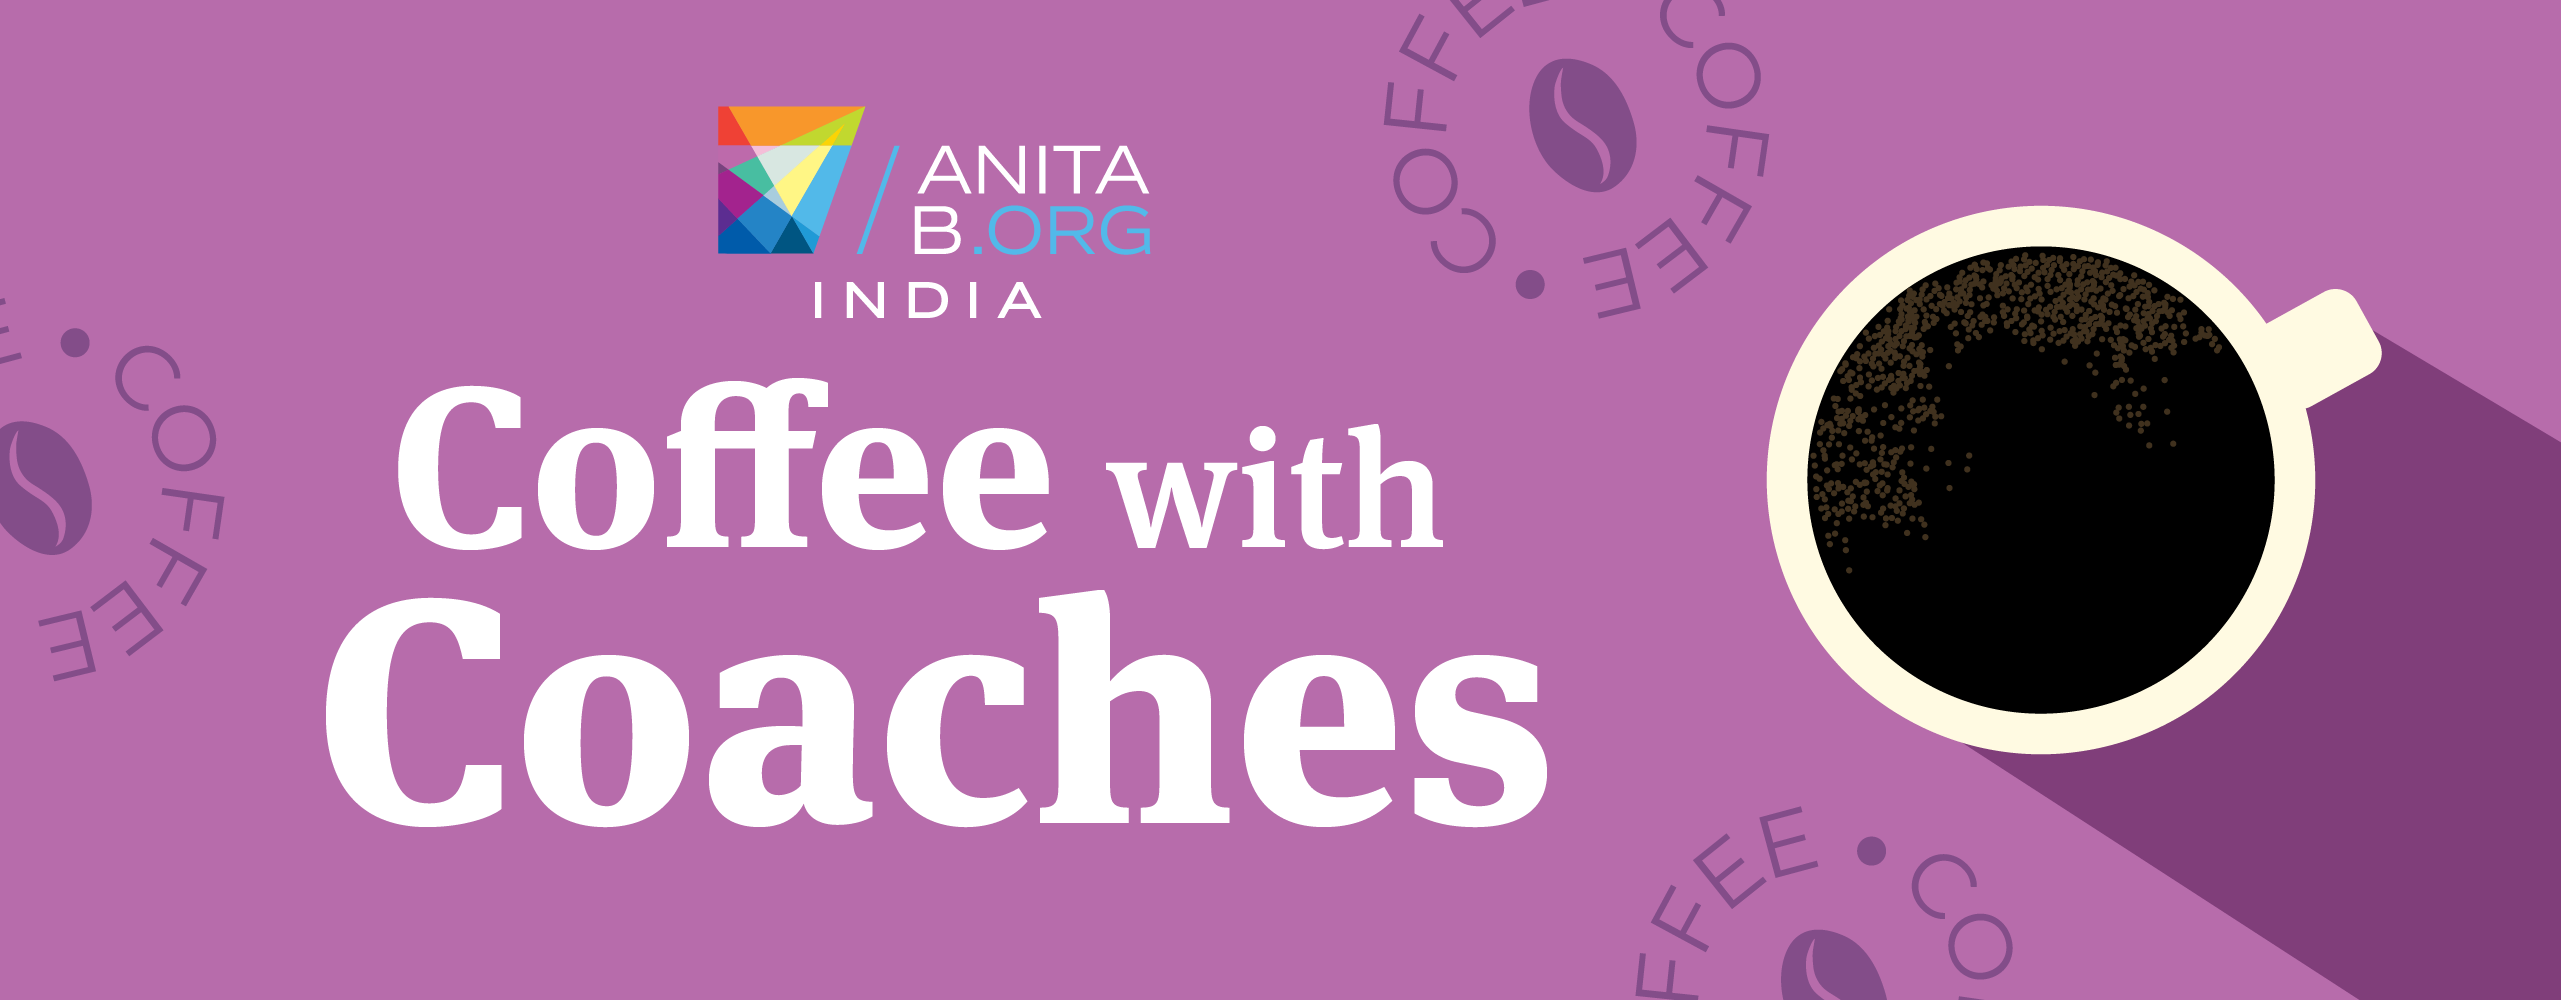 Coffee with coaches